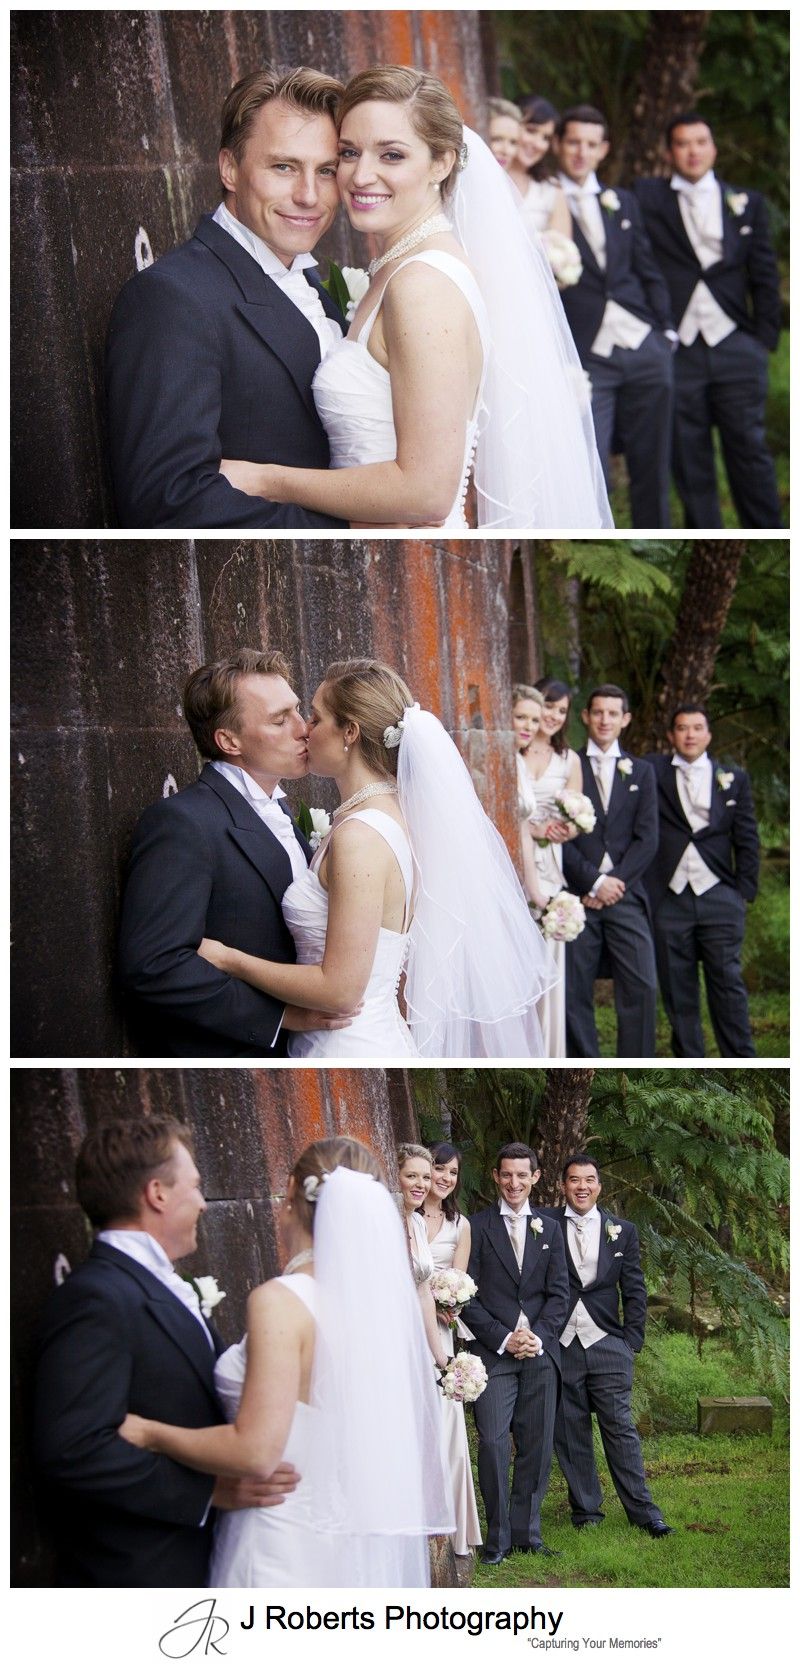 Bridal couple with bridal party watching - wedding photography sydney